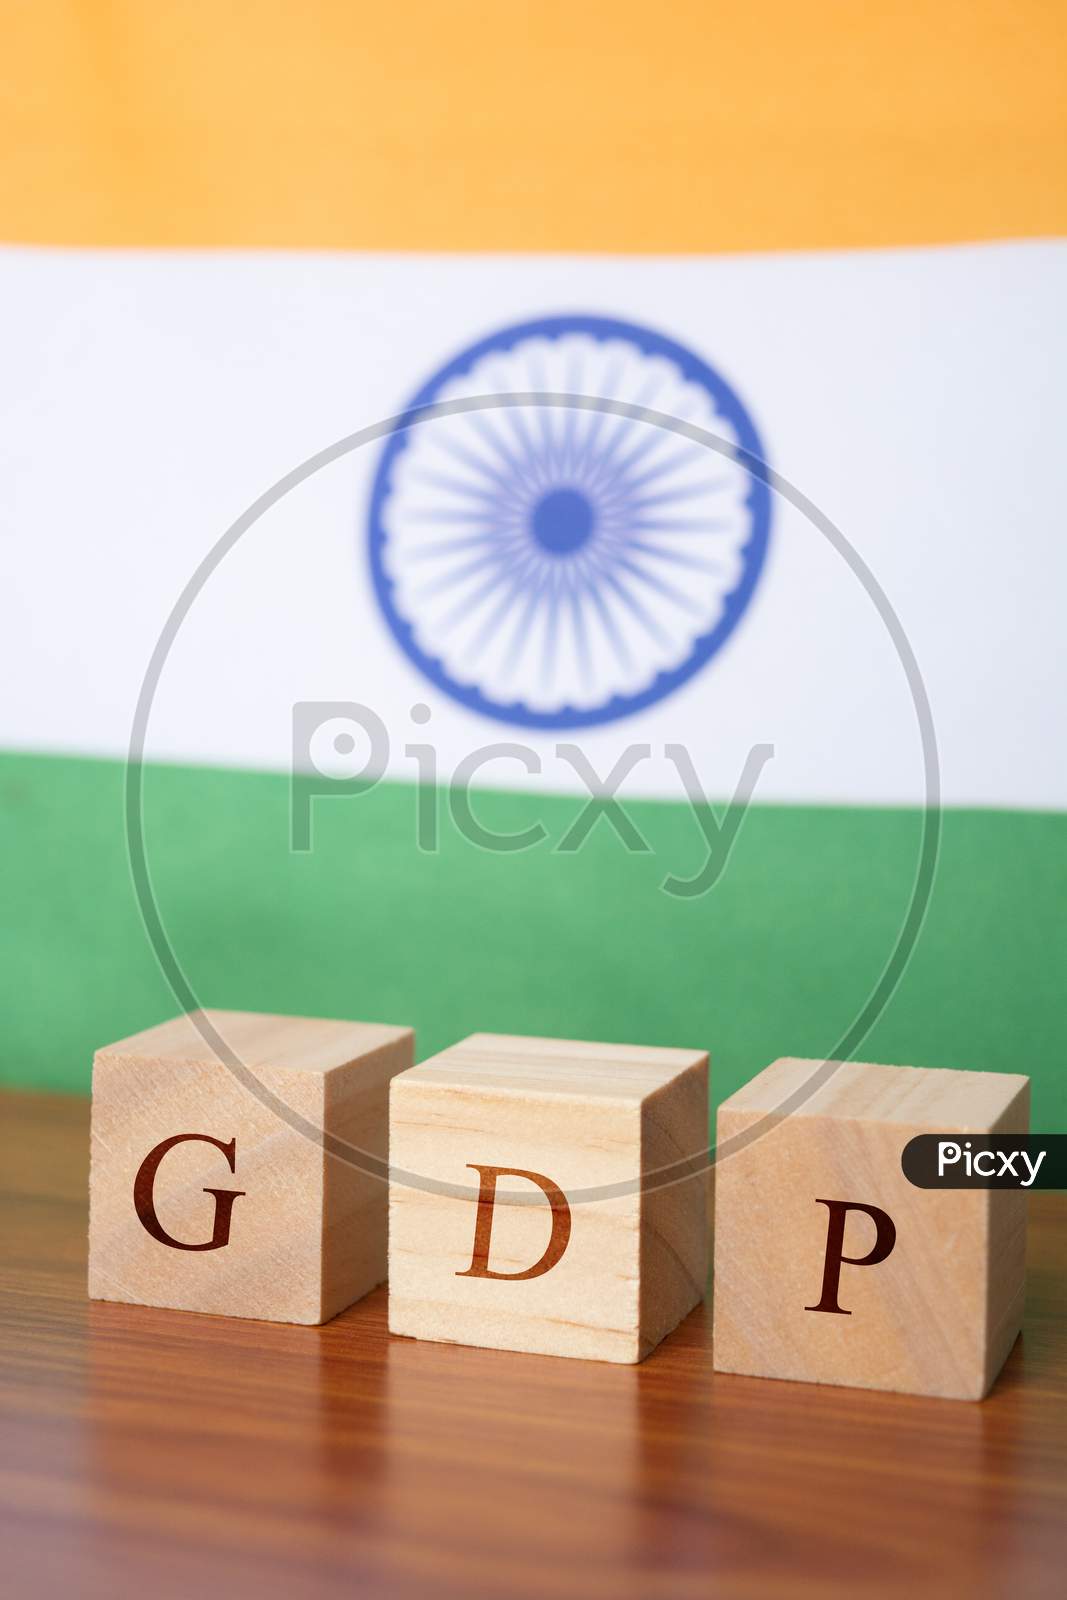 Gdp Or Gross Domestic Product In Wooden Block Letters, Indian Flag As A Background.